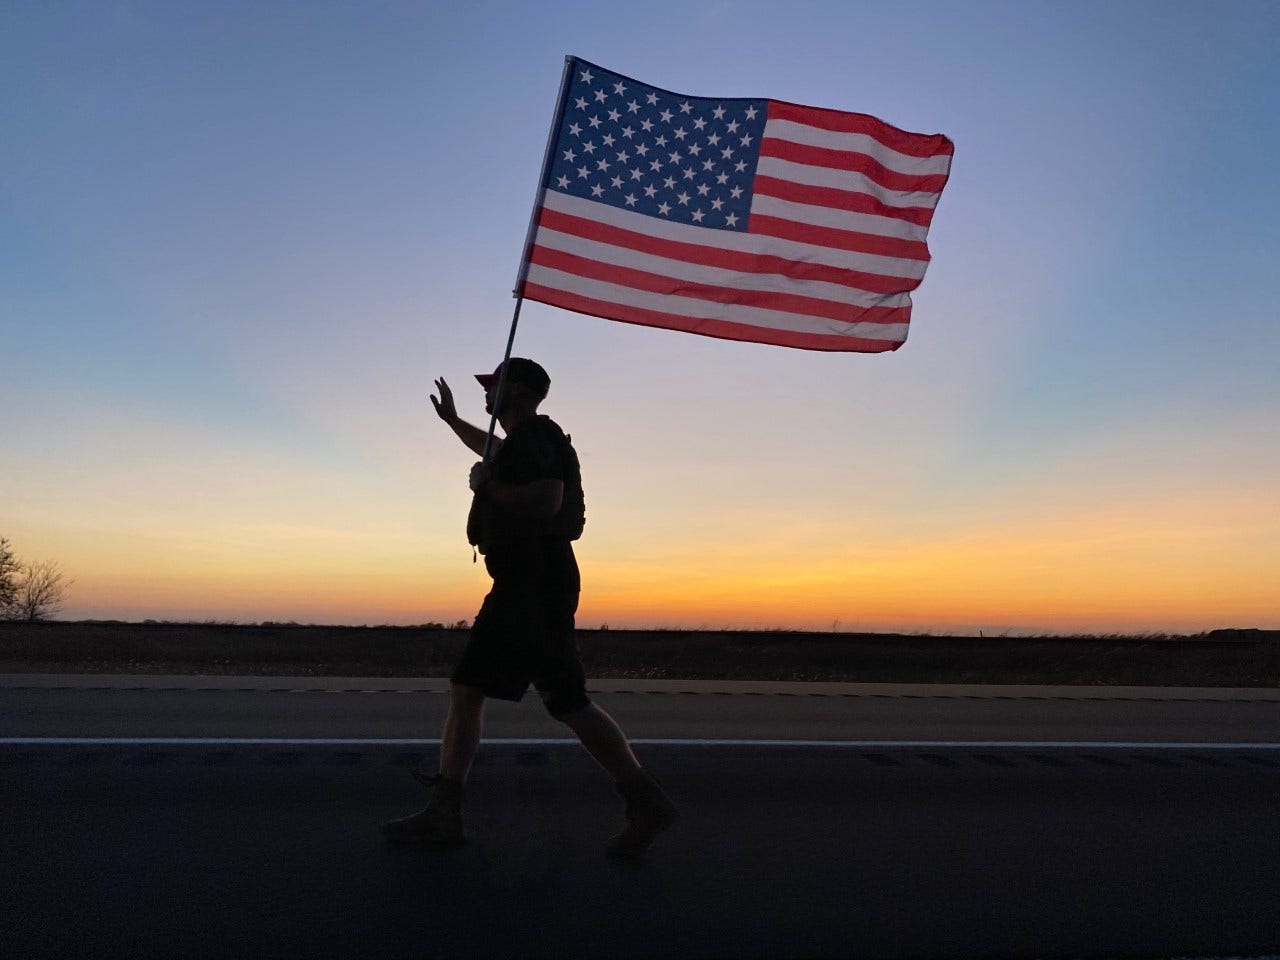 The Walking Patriot: Kansas soldier shares his story to inspire others